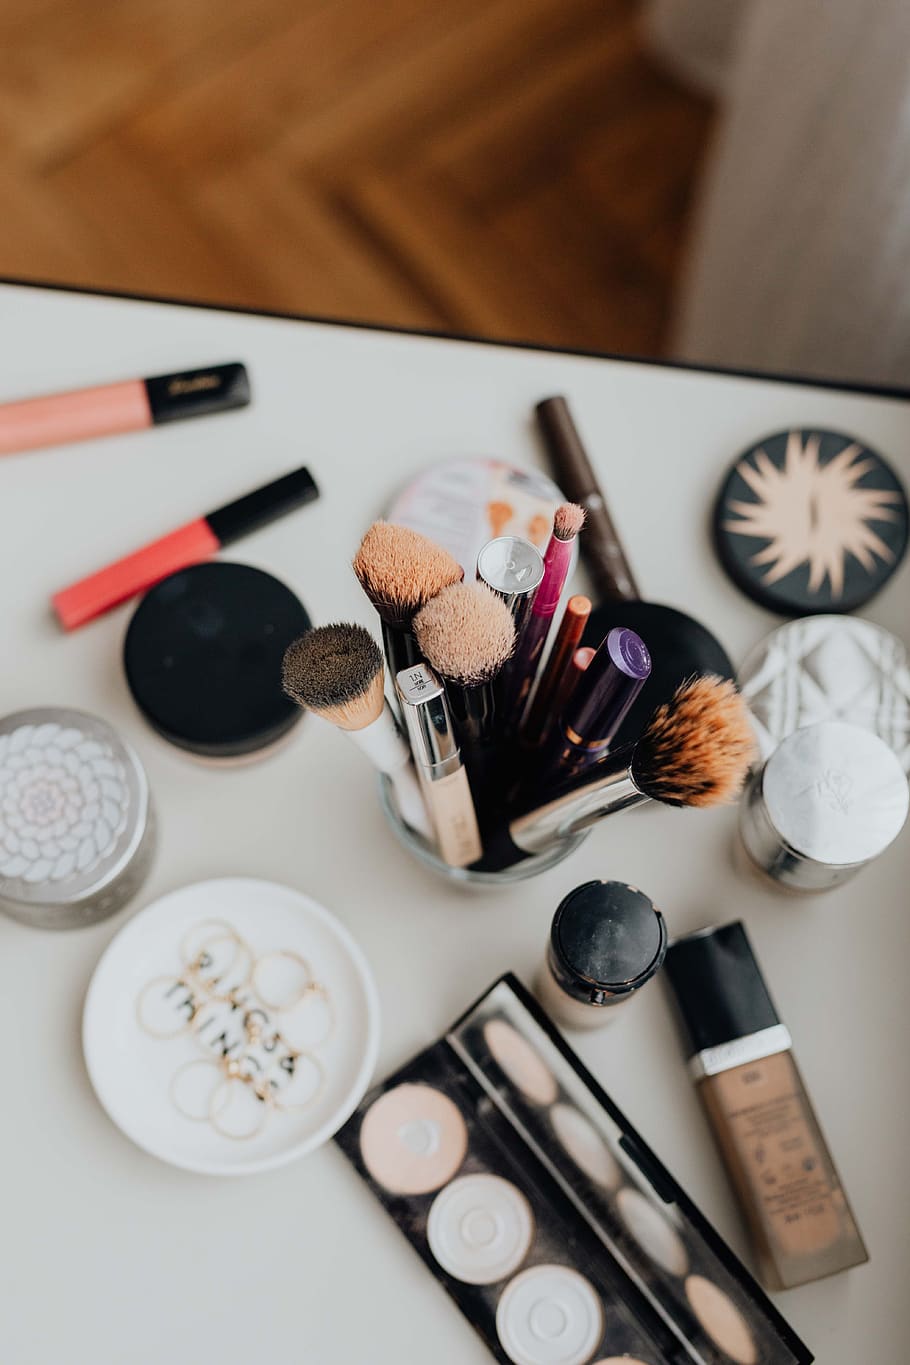 essentials, cosmetics, beauty, foundation, glamour, Makeup, brushes, make-up brush, still life, high angle view